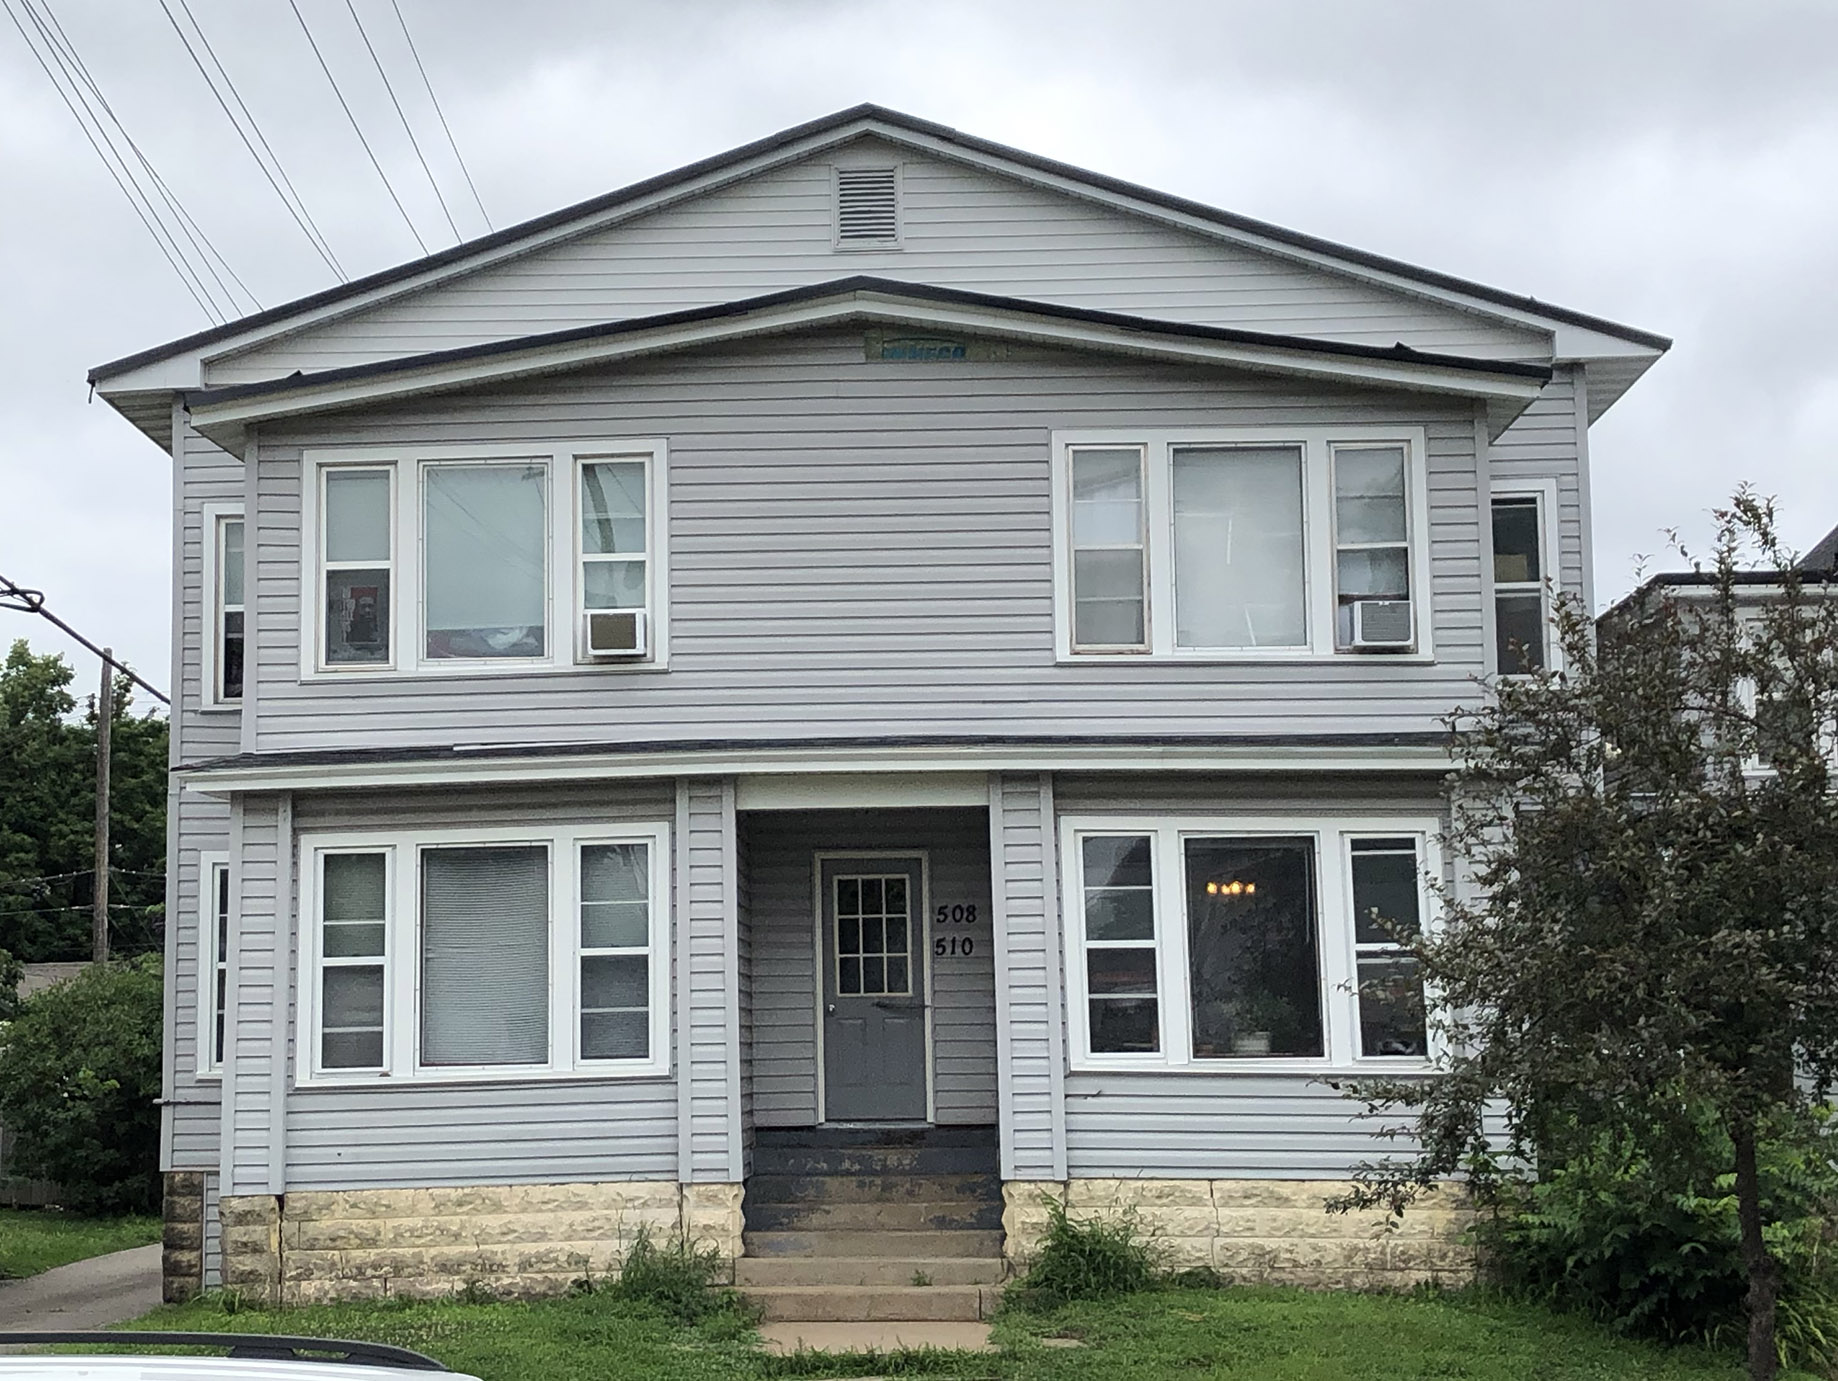 508 West Grand Ave, Eau Claire, Wisconsin 54703, 2 Bedrooms Bedrooms, ,1 BathroomBathrooms,Multi-Family,Apartment,508 West Grand Ave ,1128